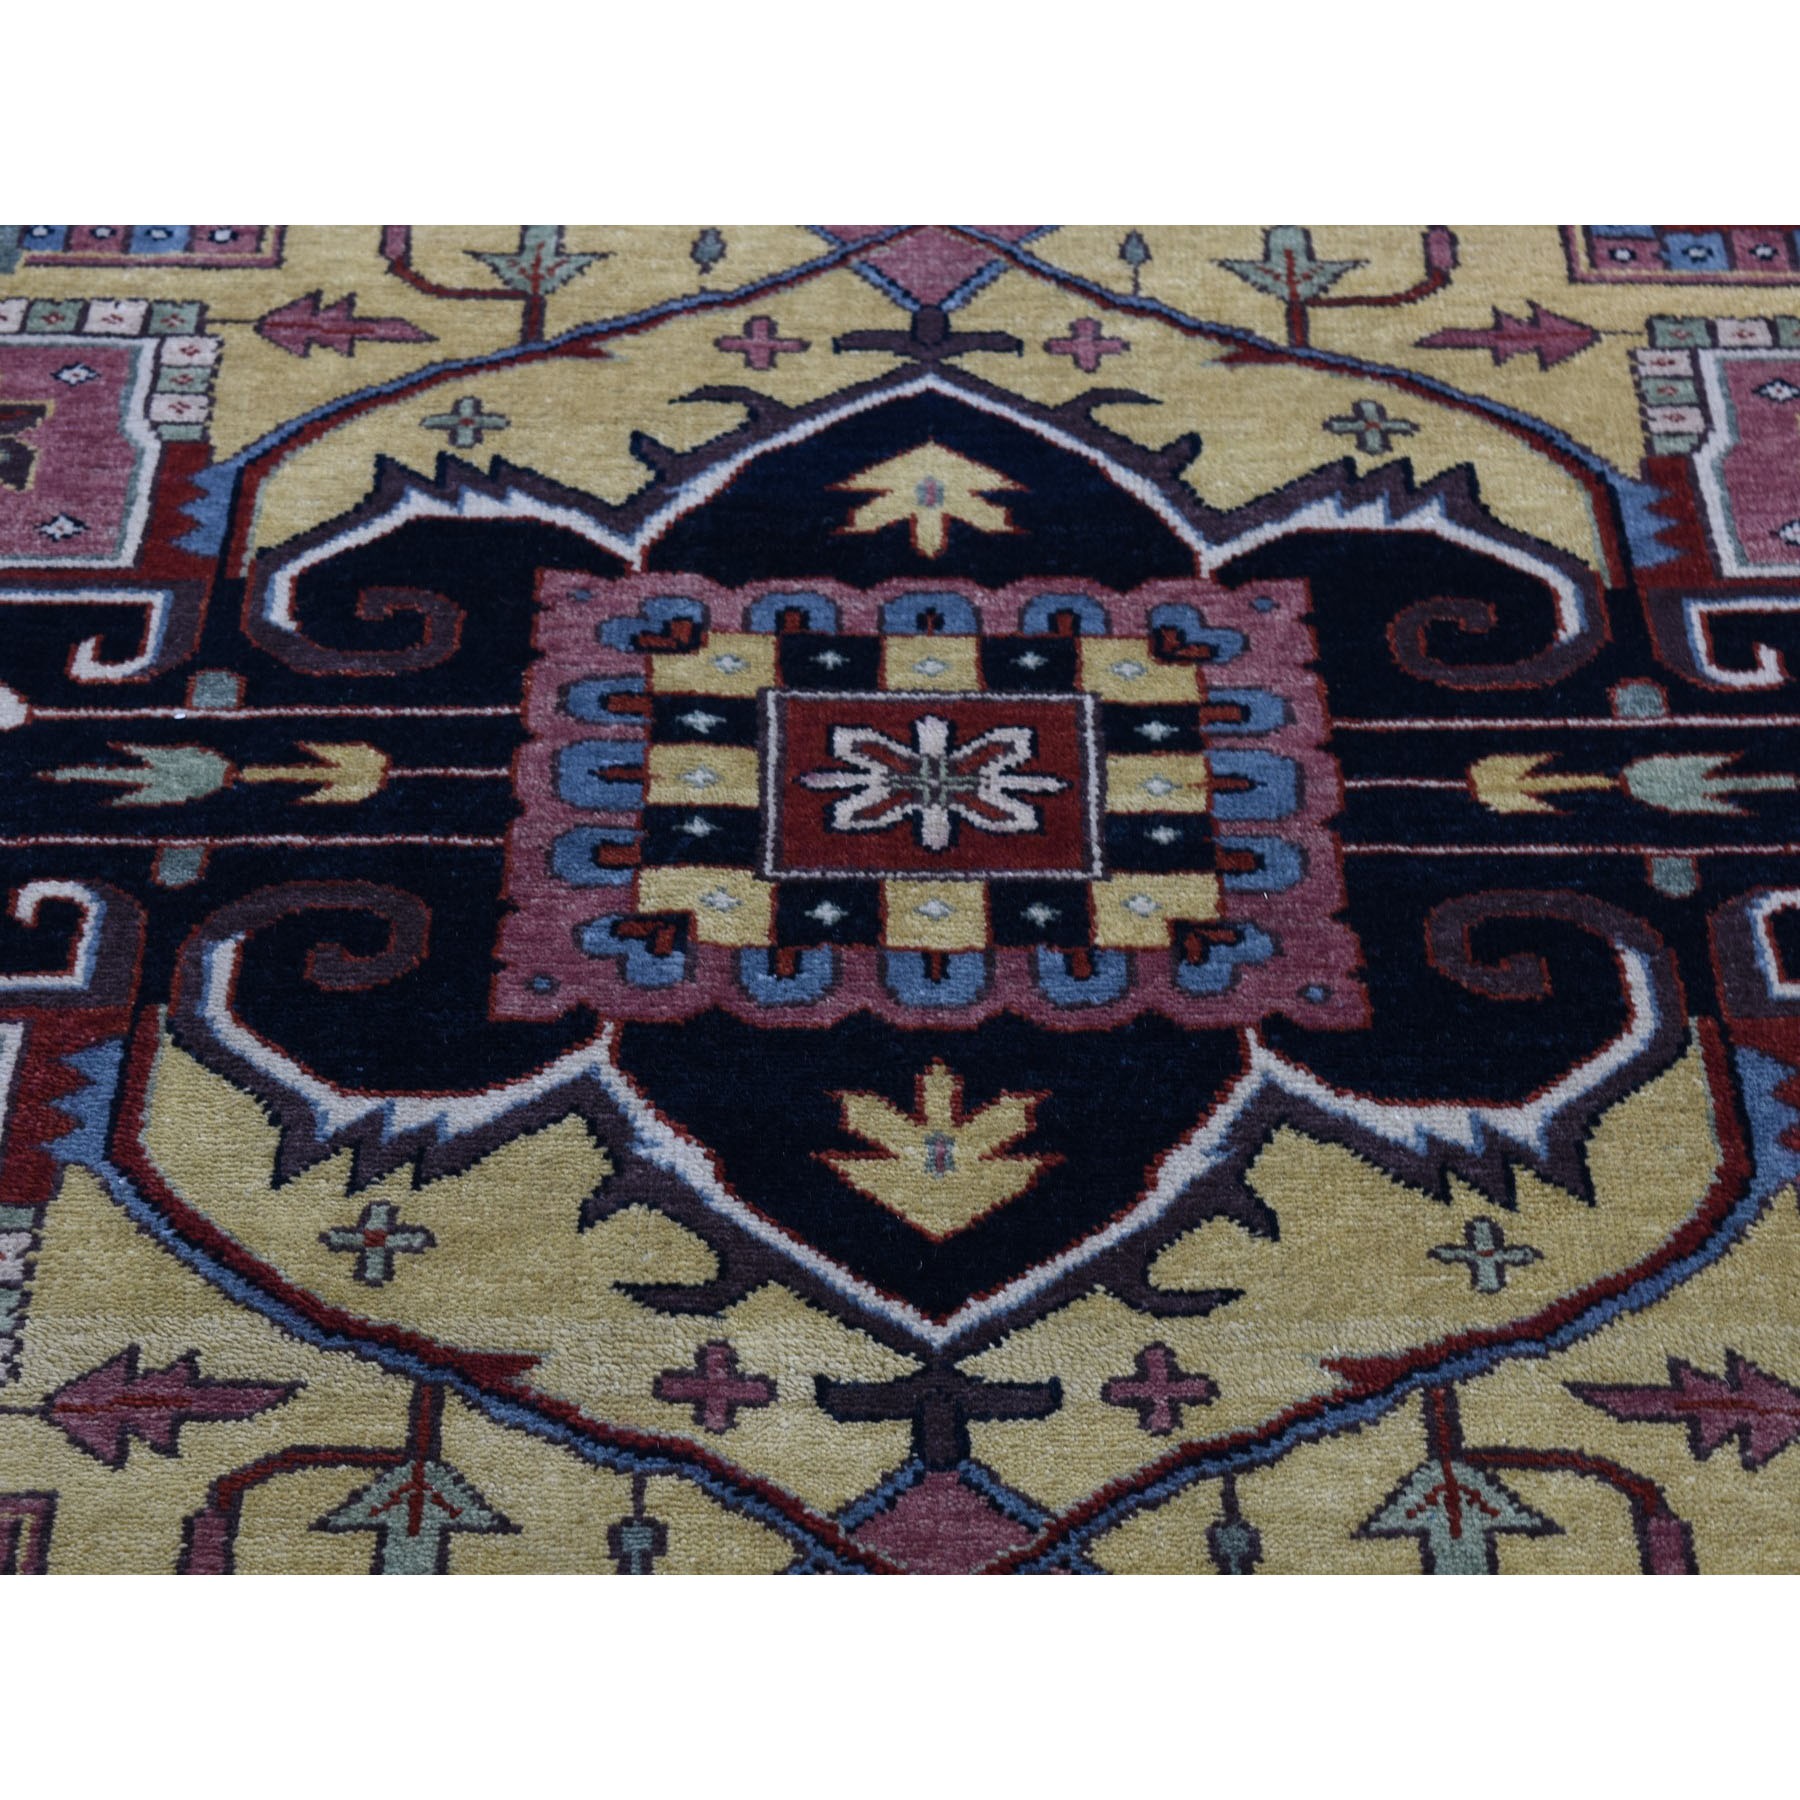 11'7"x15' Oversized Red Heriz Revival Pure Wool Hand Woven Oriental Rug 